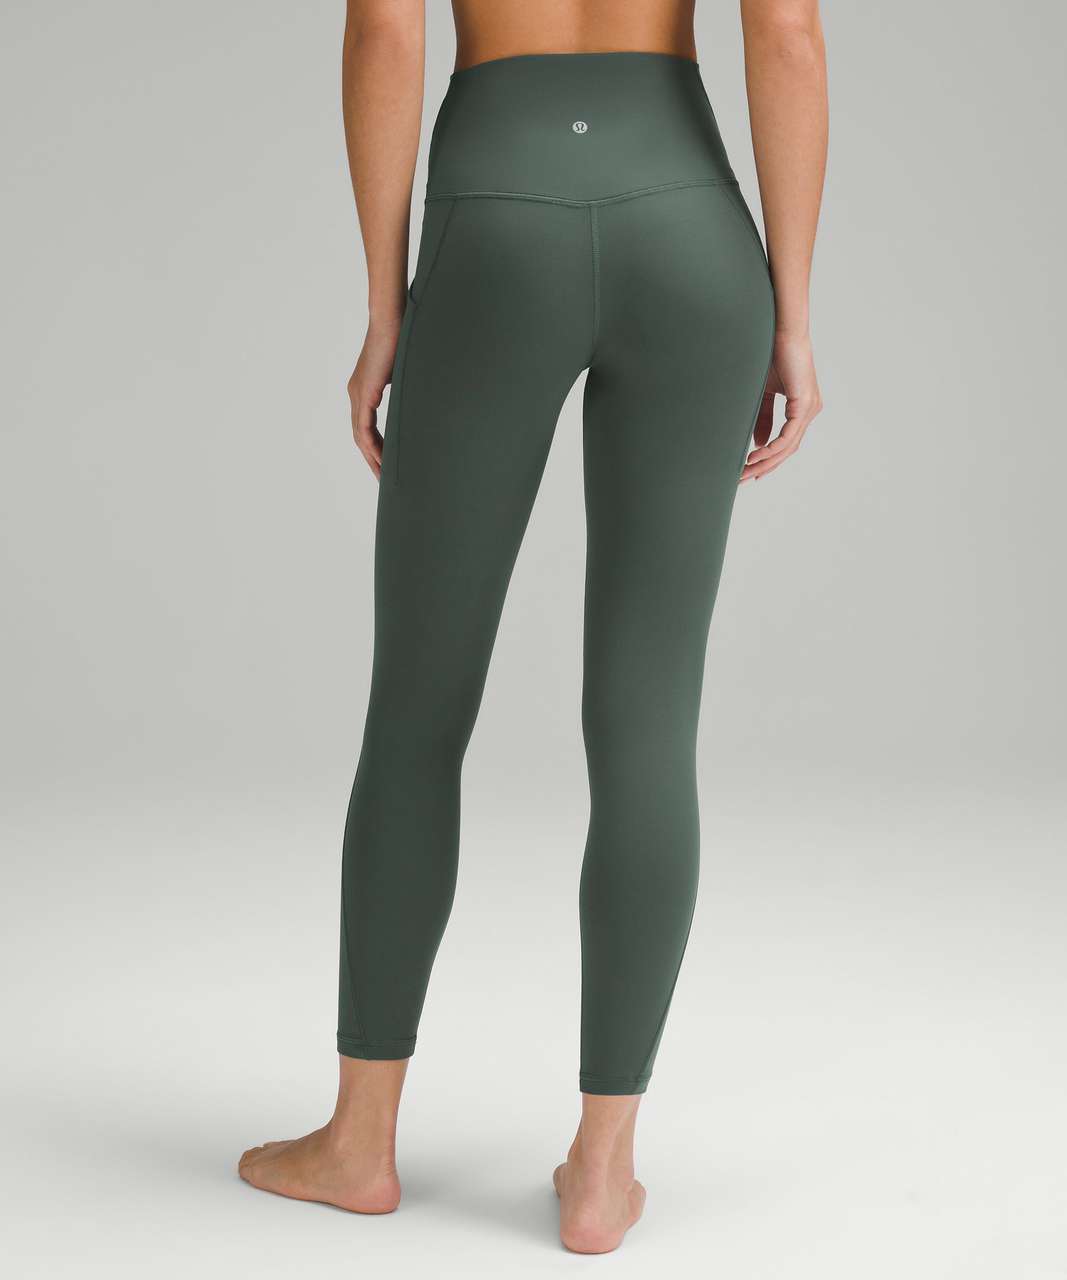 Lululemon Align High-Rise Pant with Pockets 25" - Dark Forest